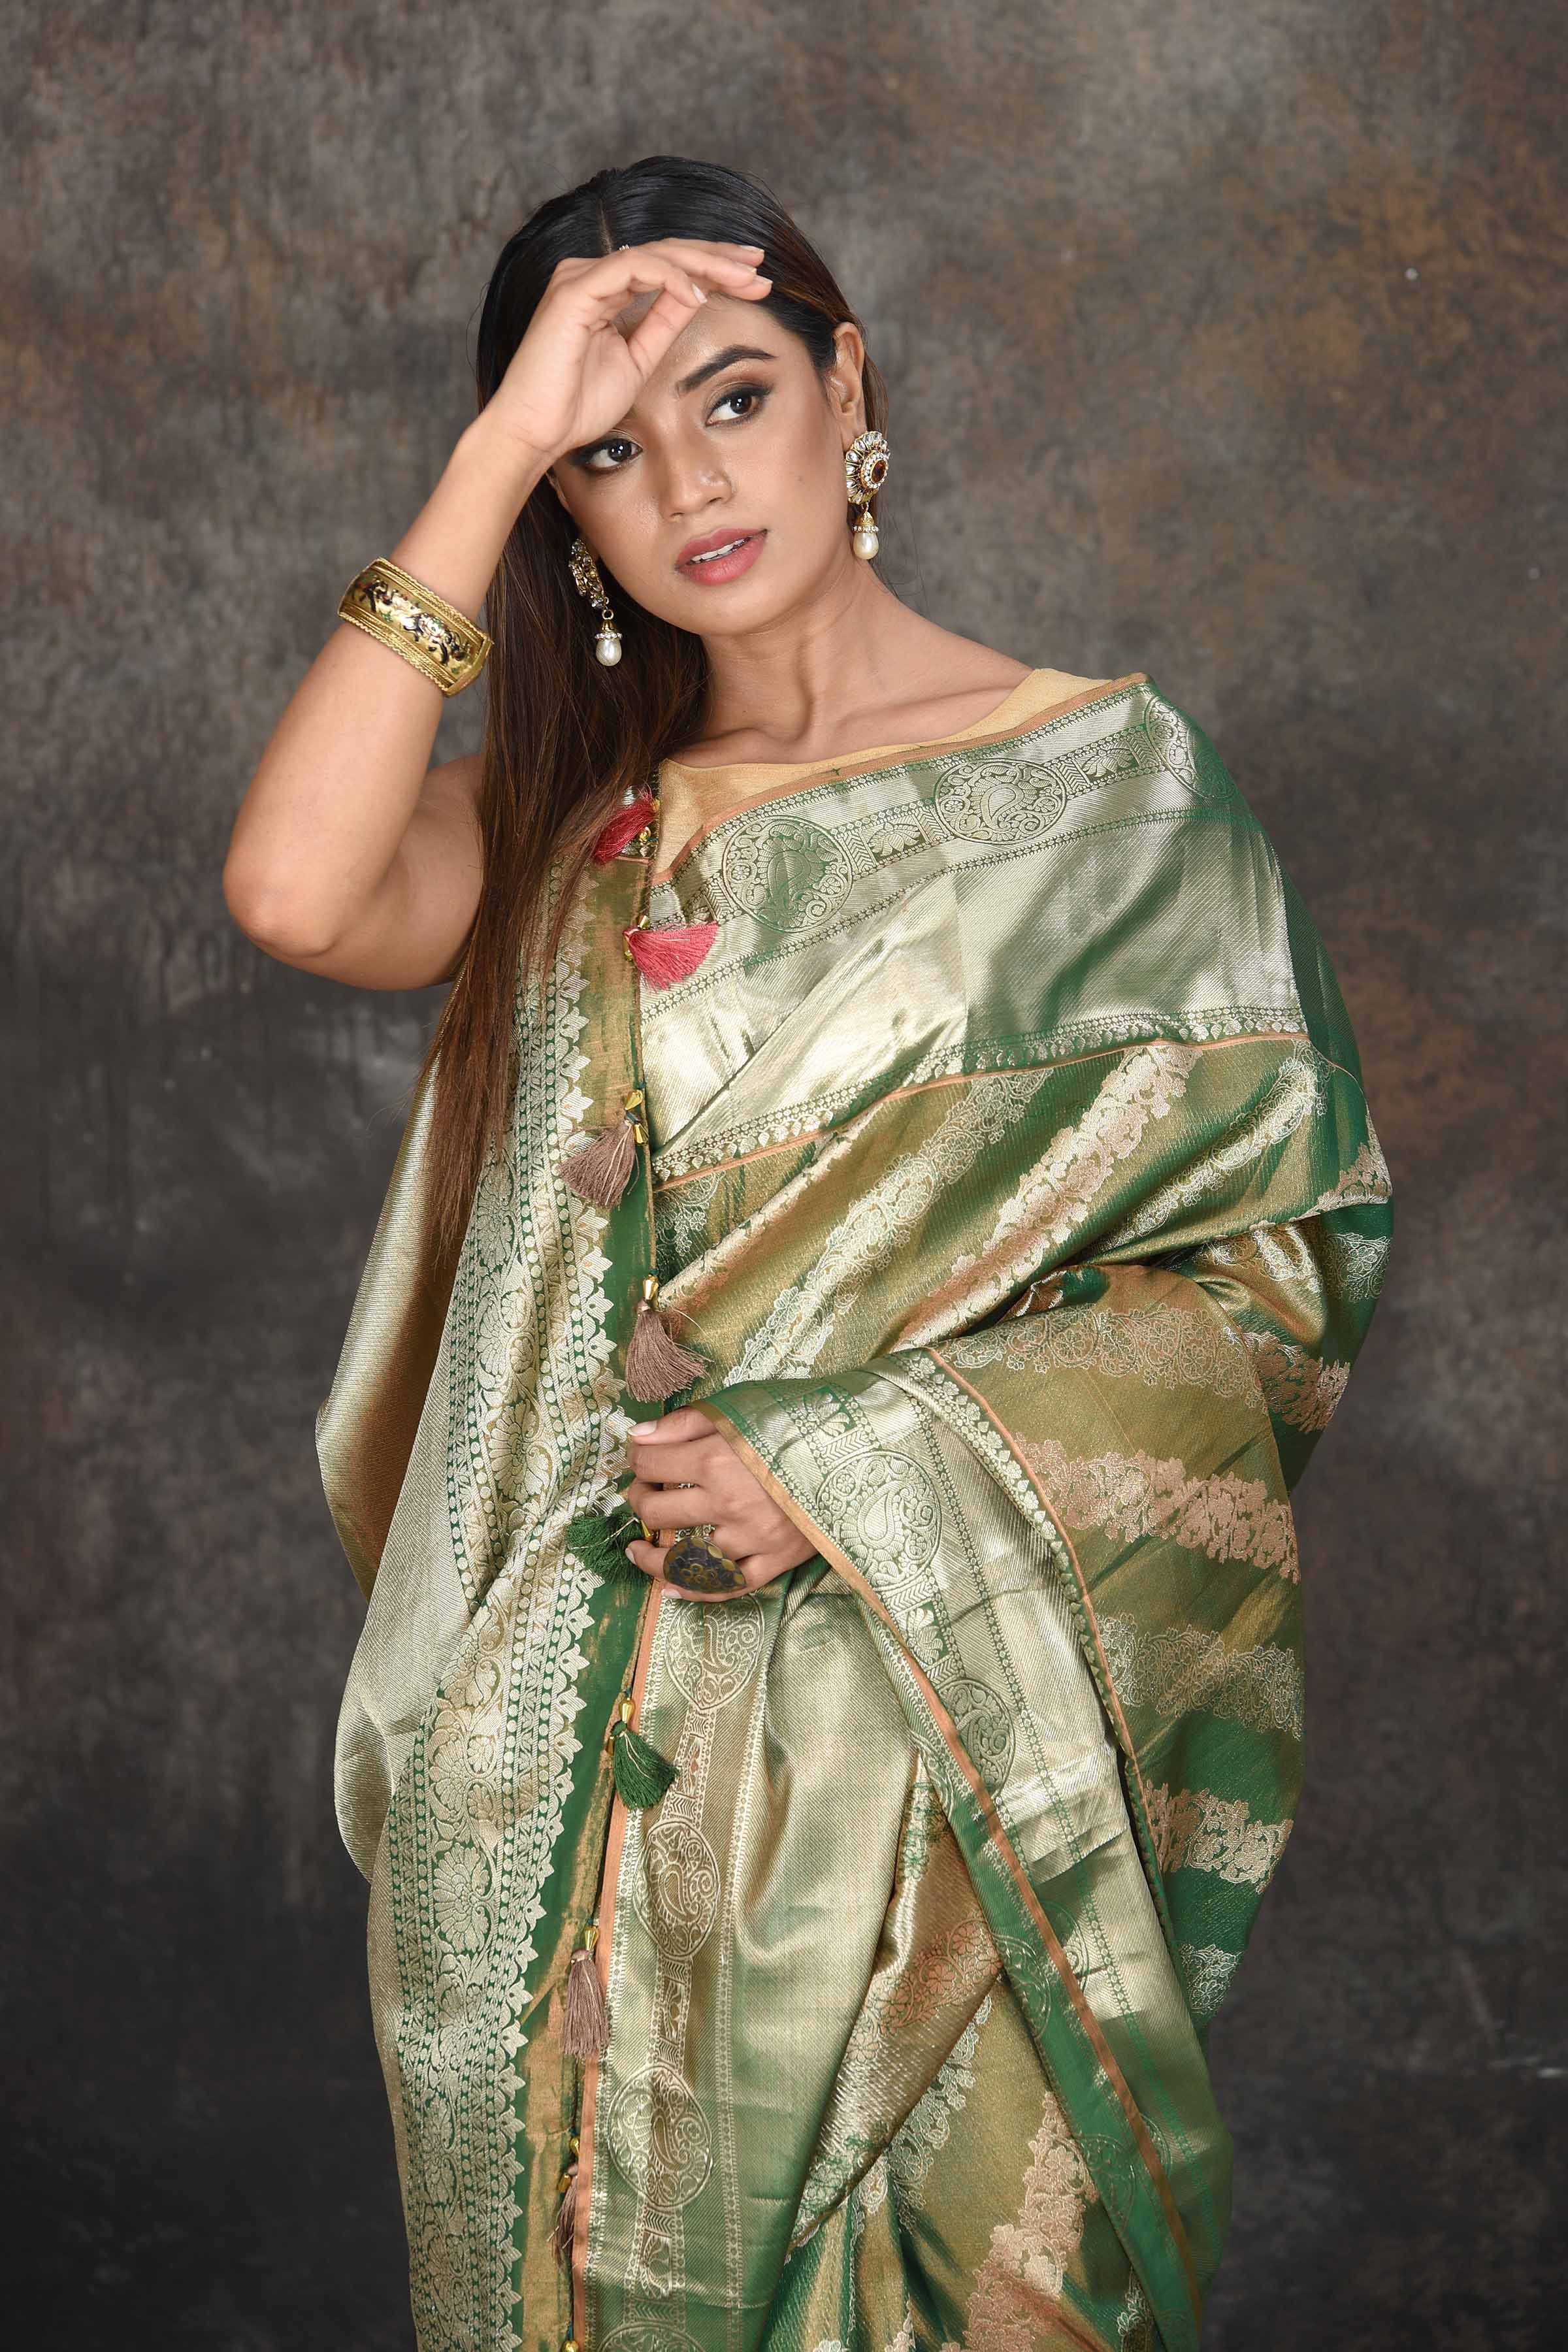 Buy beautiful mehendi green and silver tissue Kanjeevaram saree online in USA. Be the center of attraction on special occasions in ethnic sarees, designer sarees, embroidered sarees, handwoven sarees, pure silk sarees from Pure Elegance Indian saree store in USA.-closeup